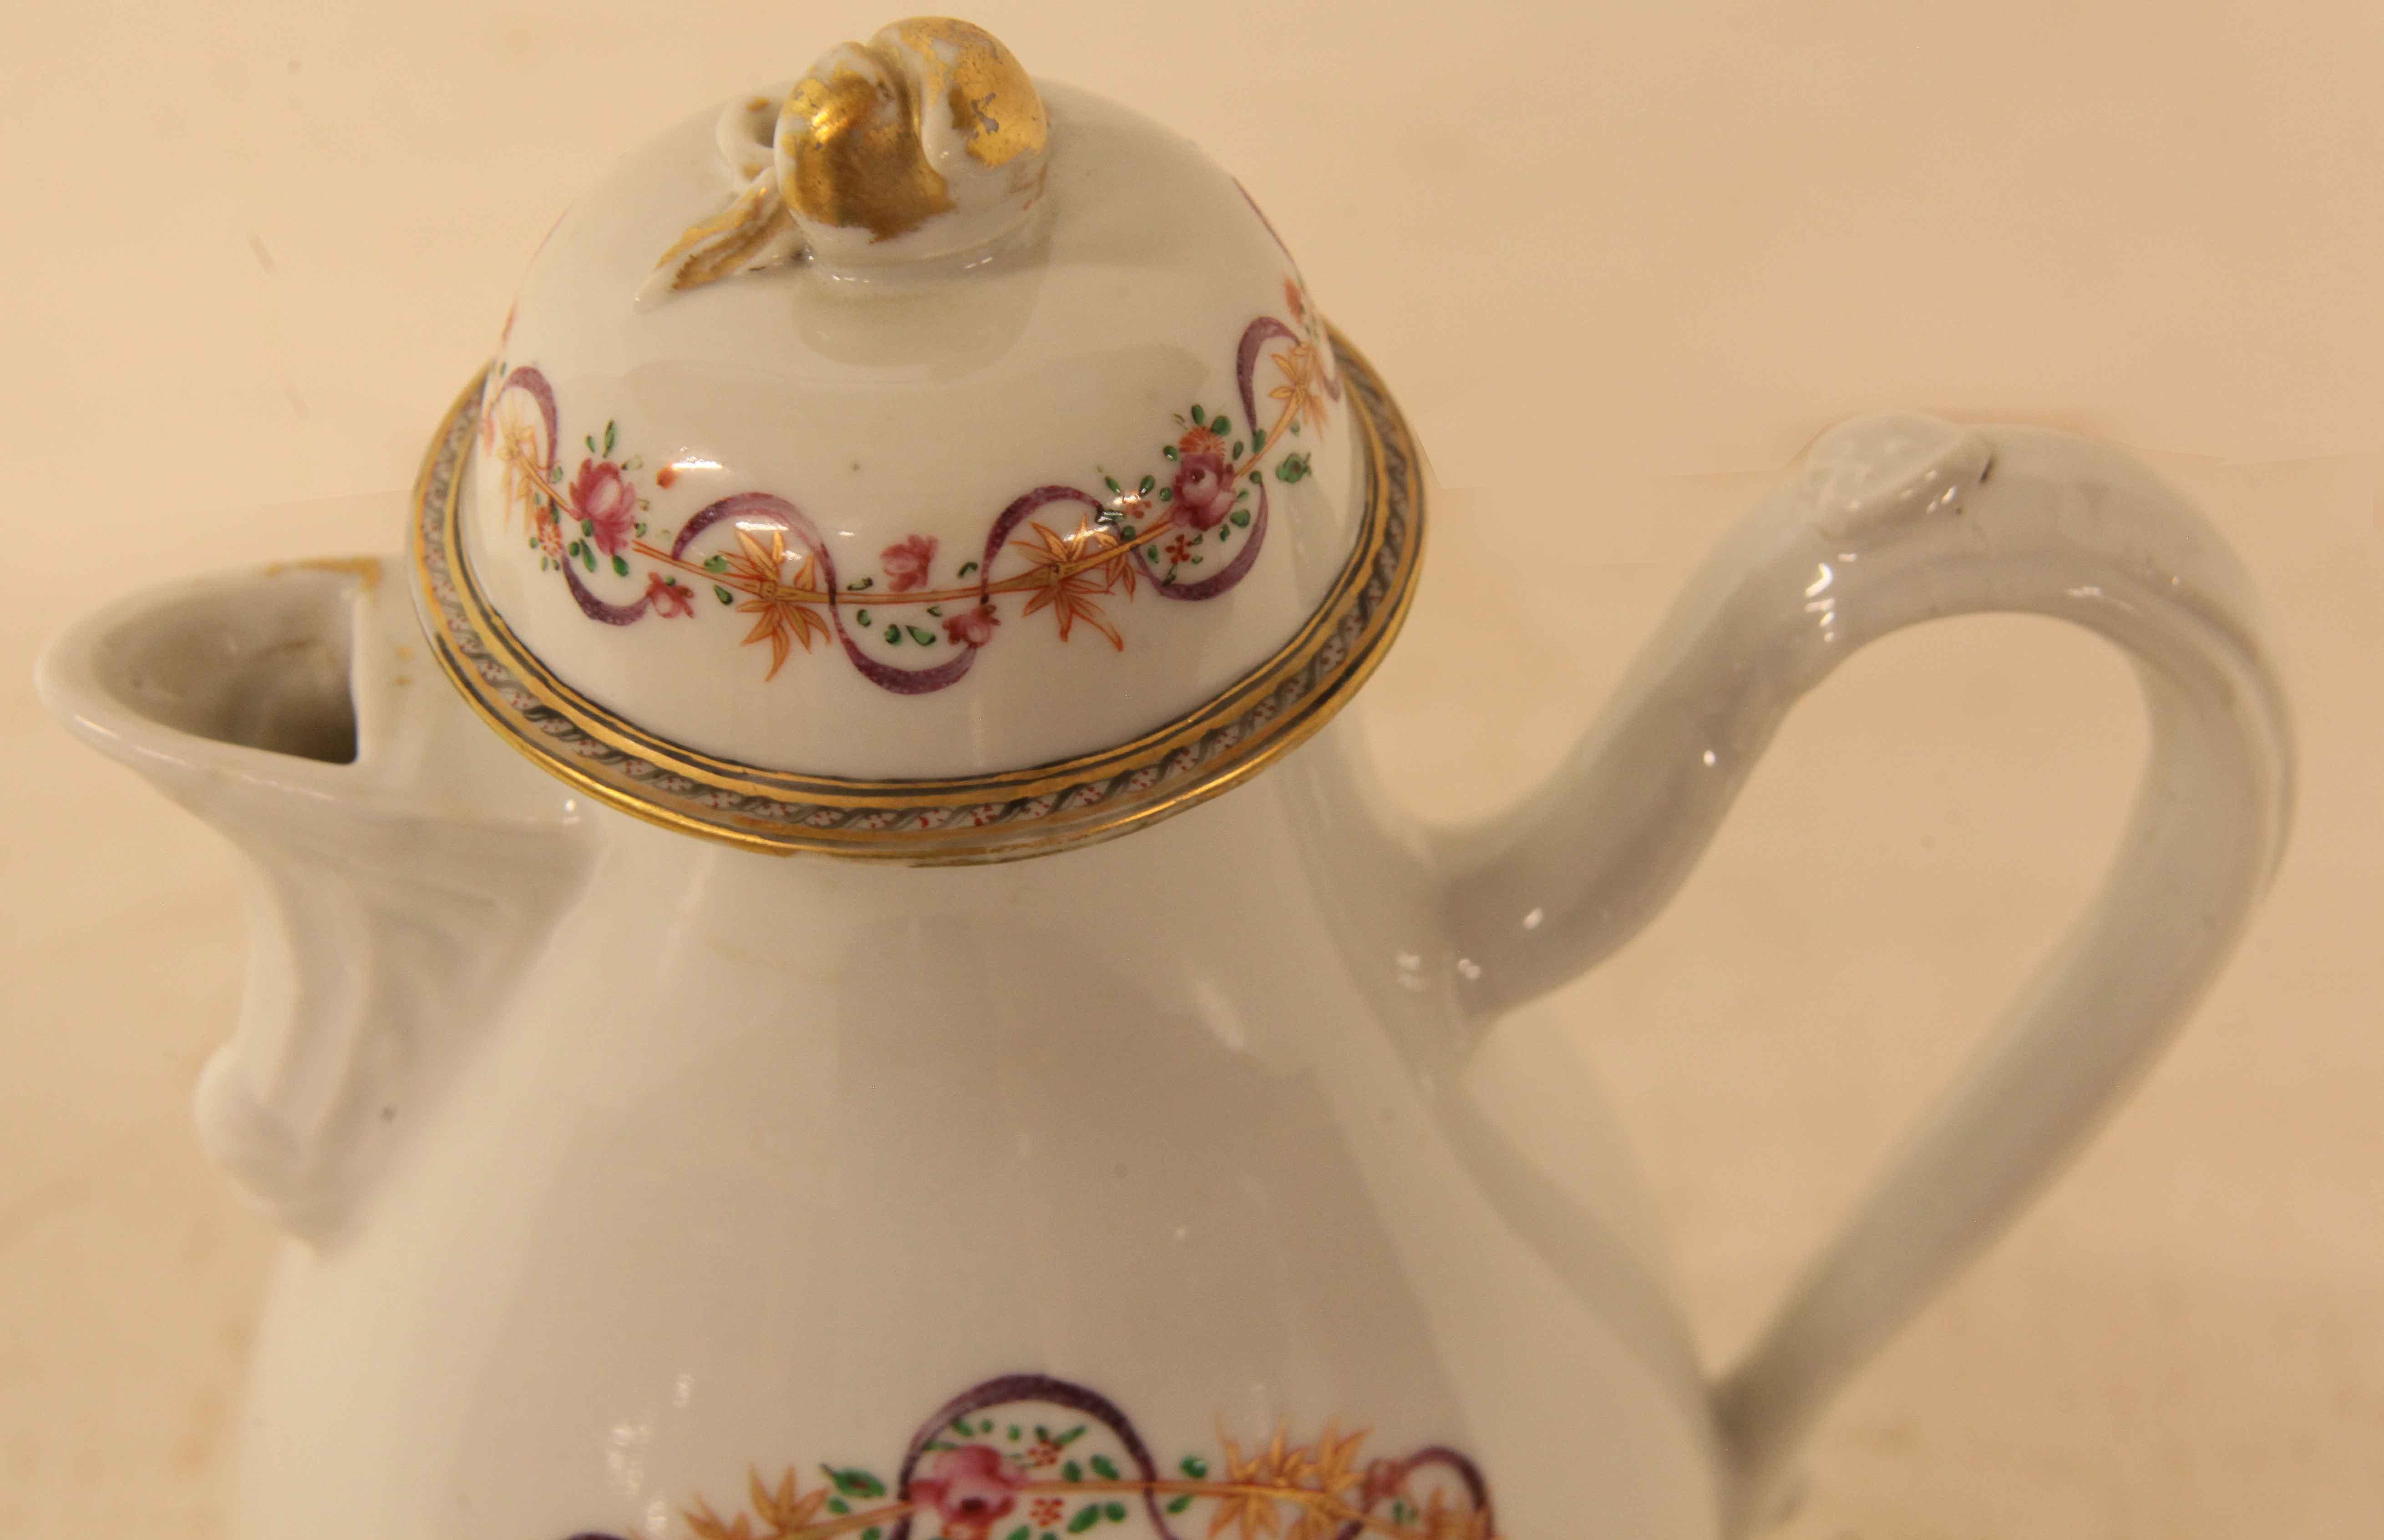 Chinese export armorial teapot, the lid with gilded acorn finial and the perimeter decorated with a floral pattern and a lavender thread line weaving in and out..  A larger version of this pattern repeats on both sides of the body . Centrally